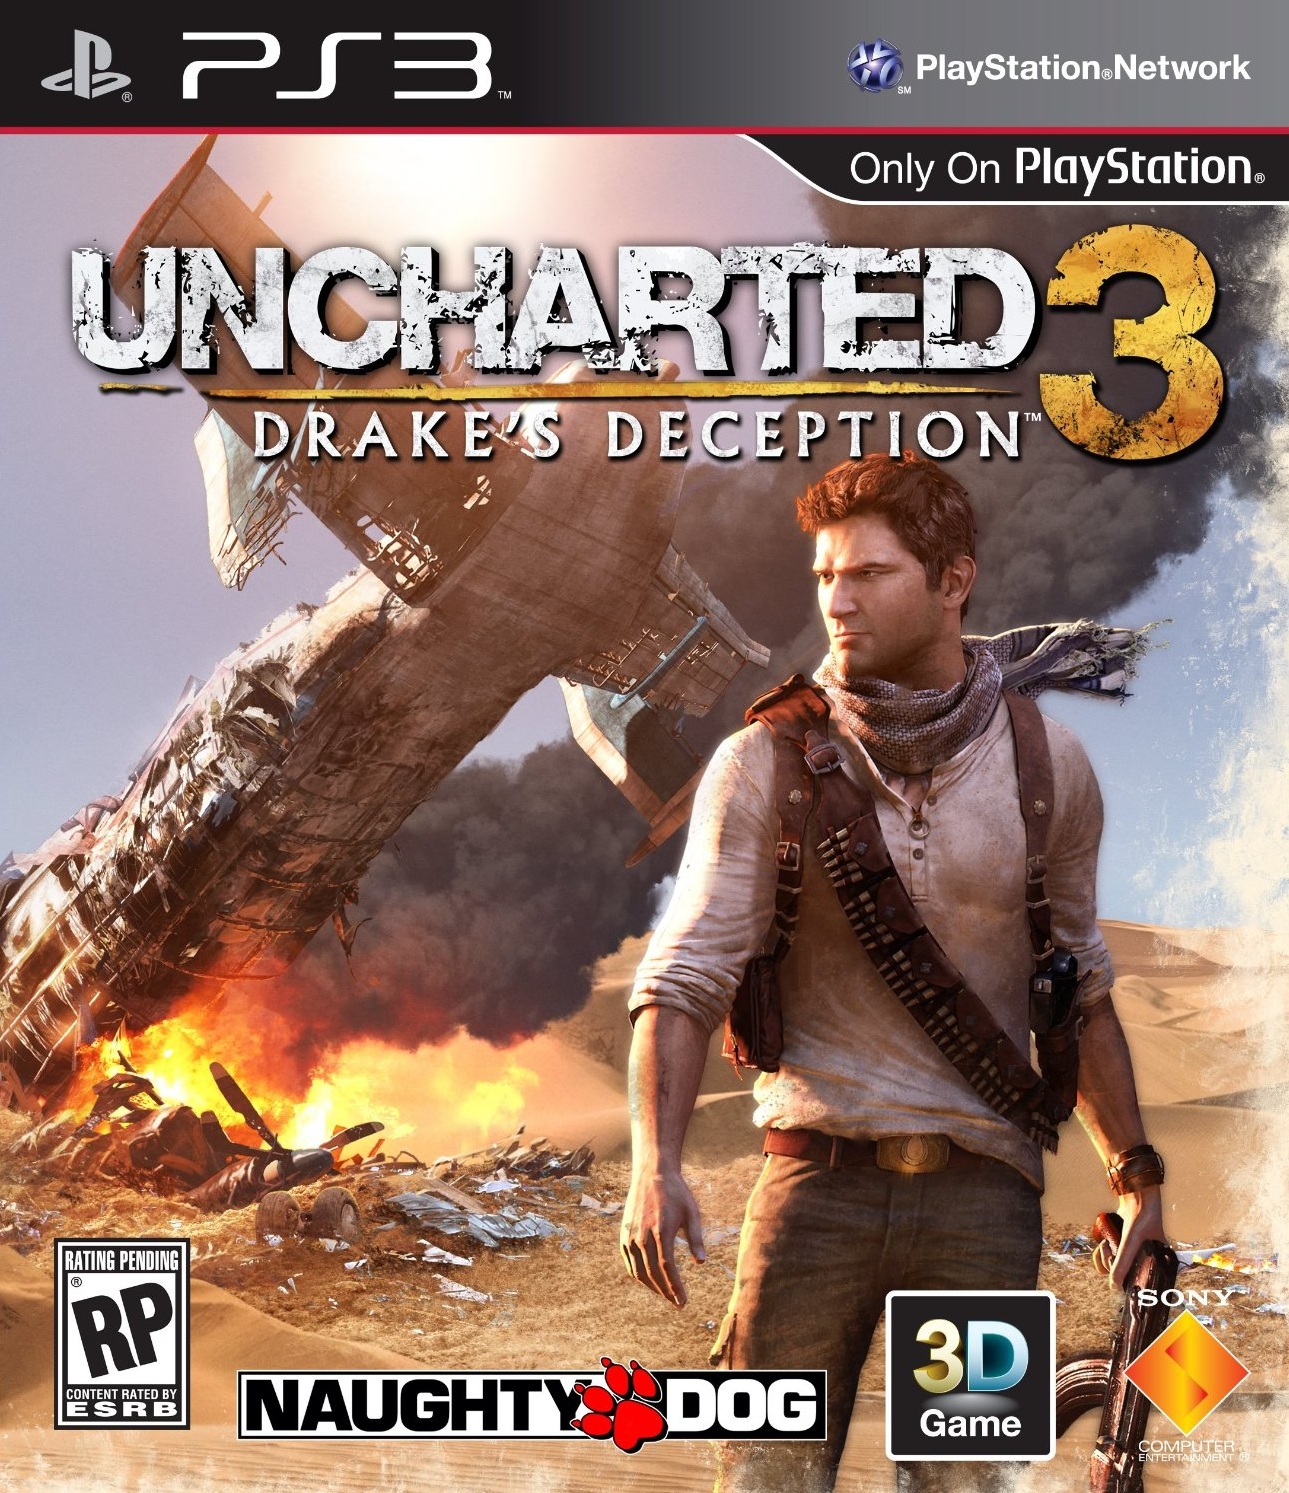 Uncharted 3 Drake’s Deception Review